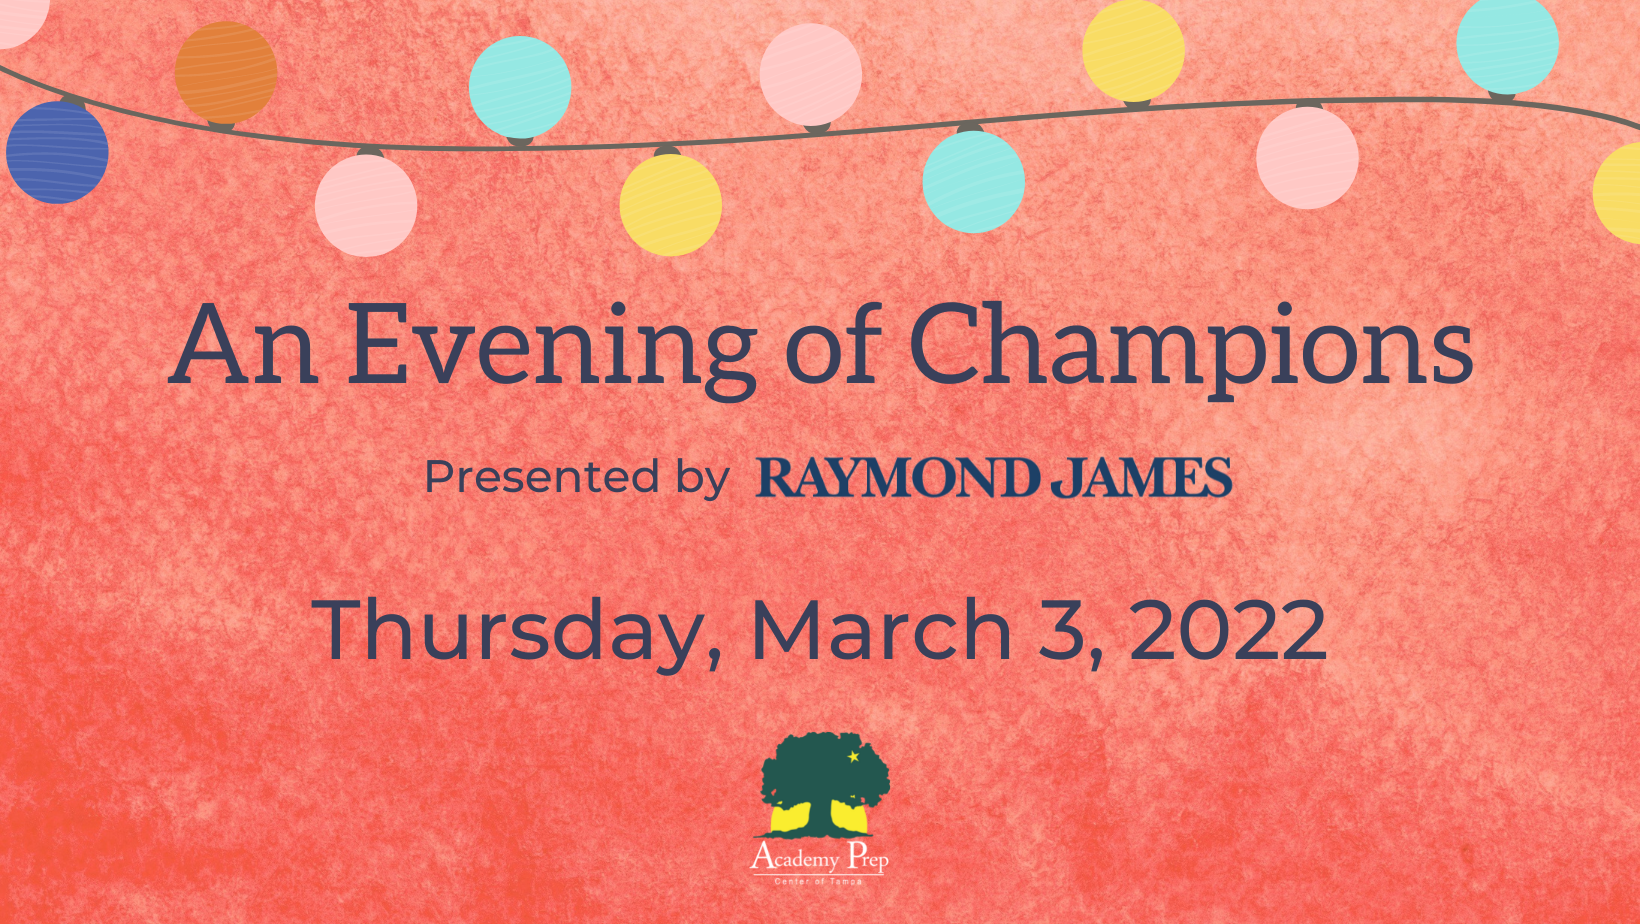 An Evening of Champions